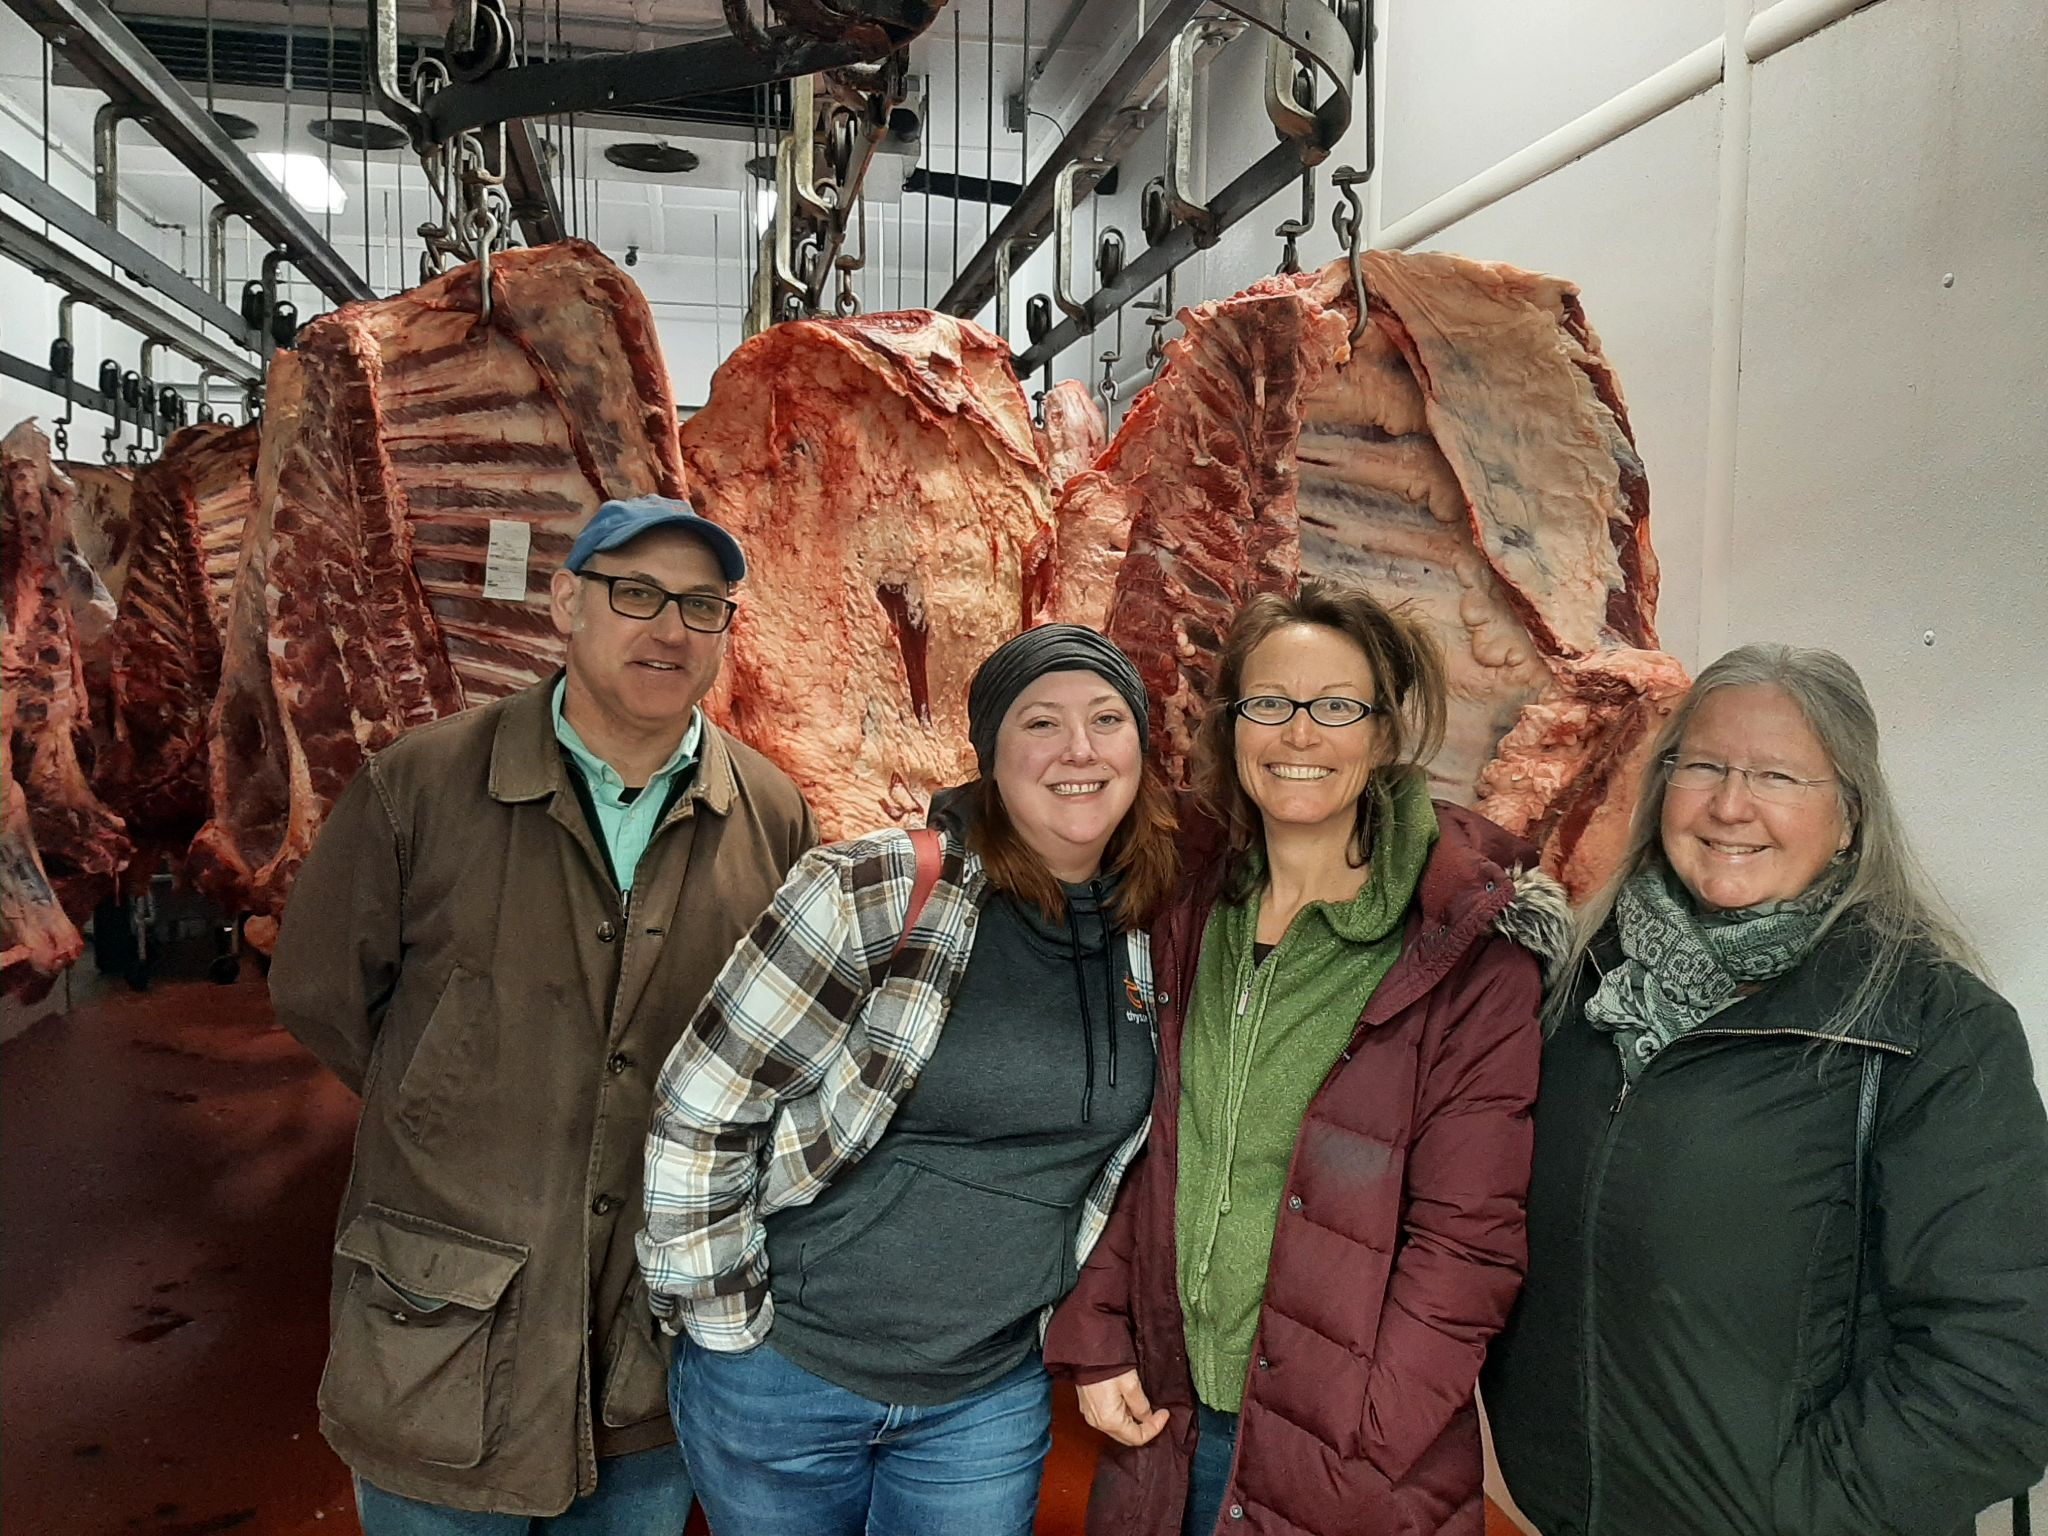 Meatsmith Coop Has Plans For Improving Meat Processing